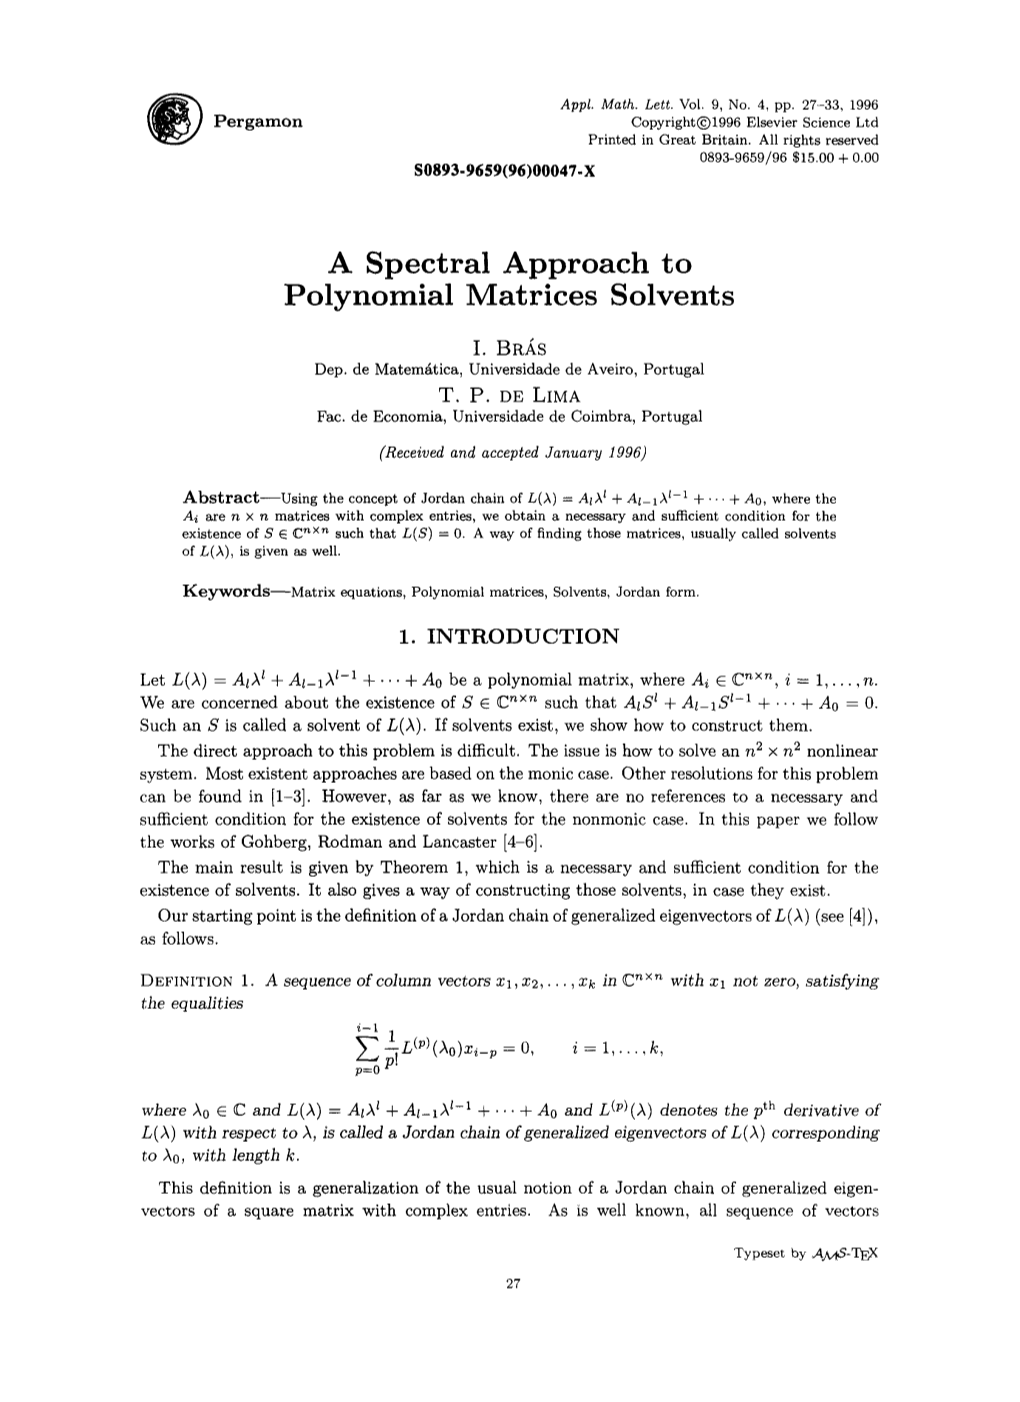 A Spectral Approach to Polynomial Matrices Solvents